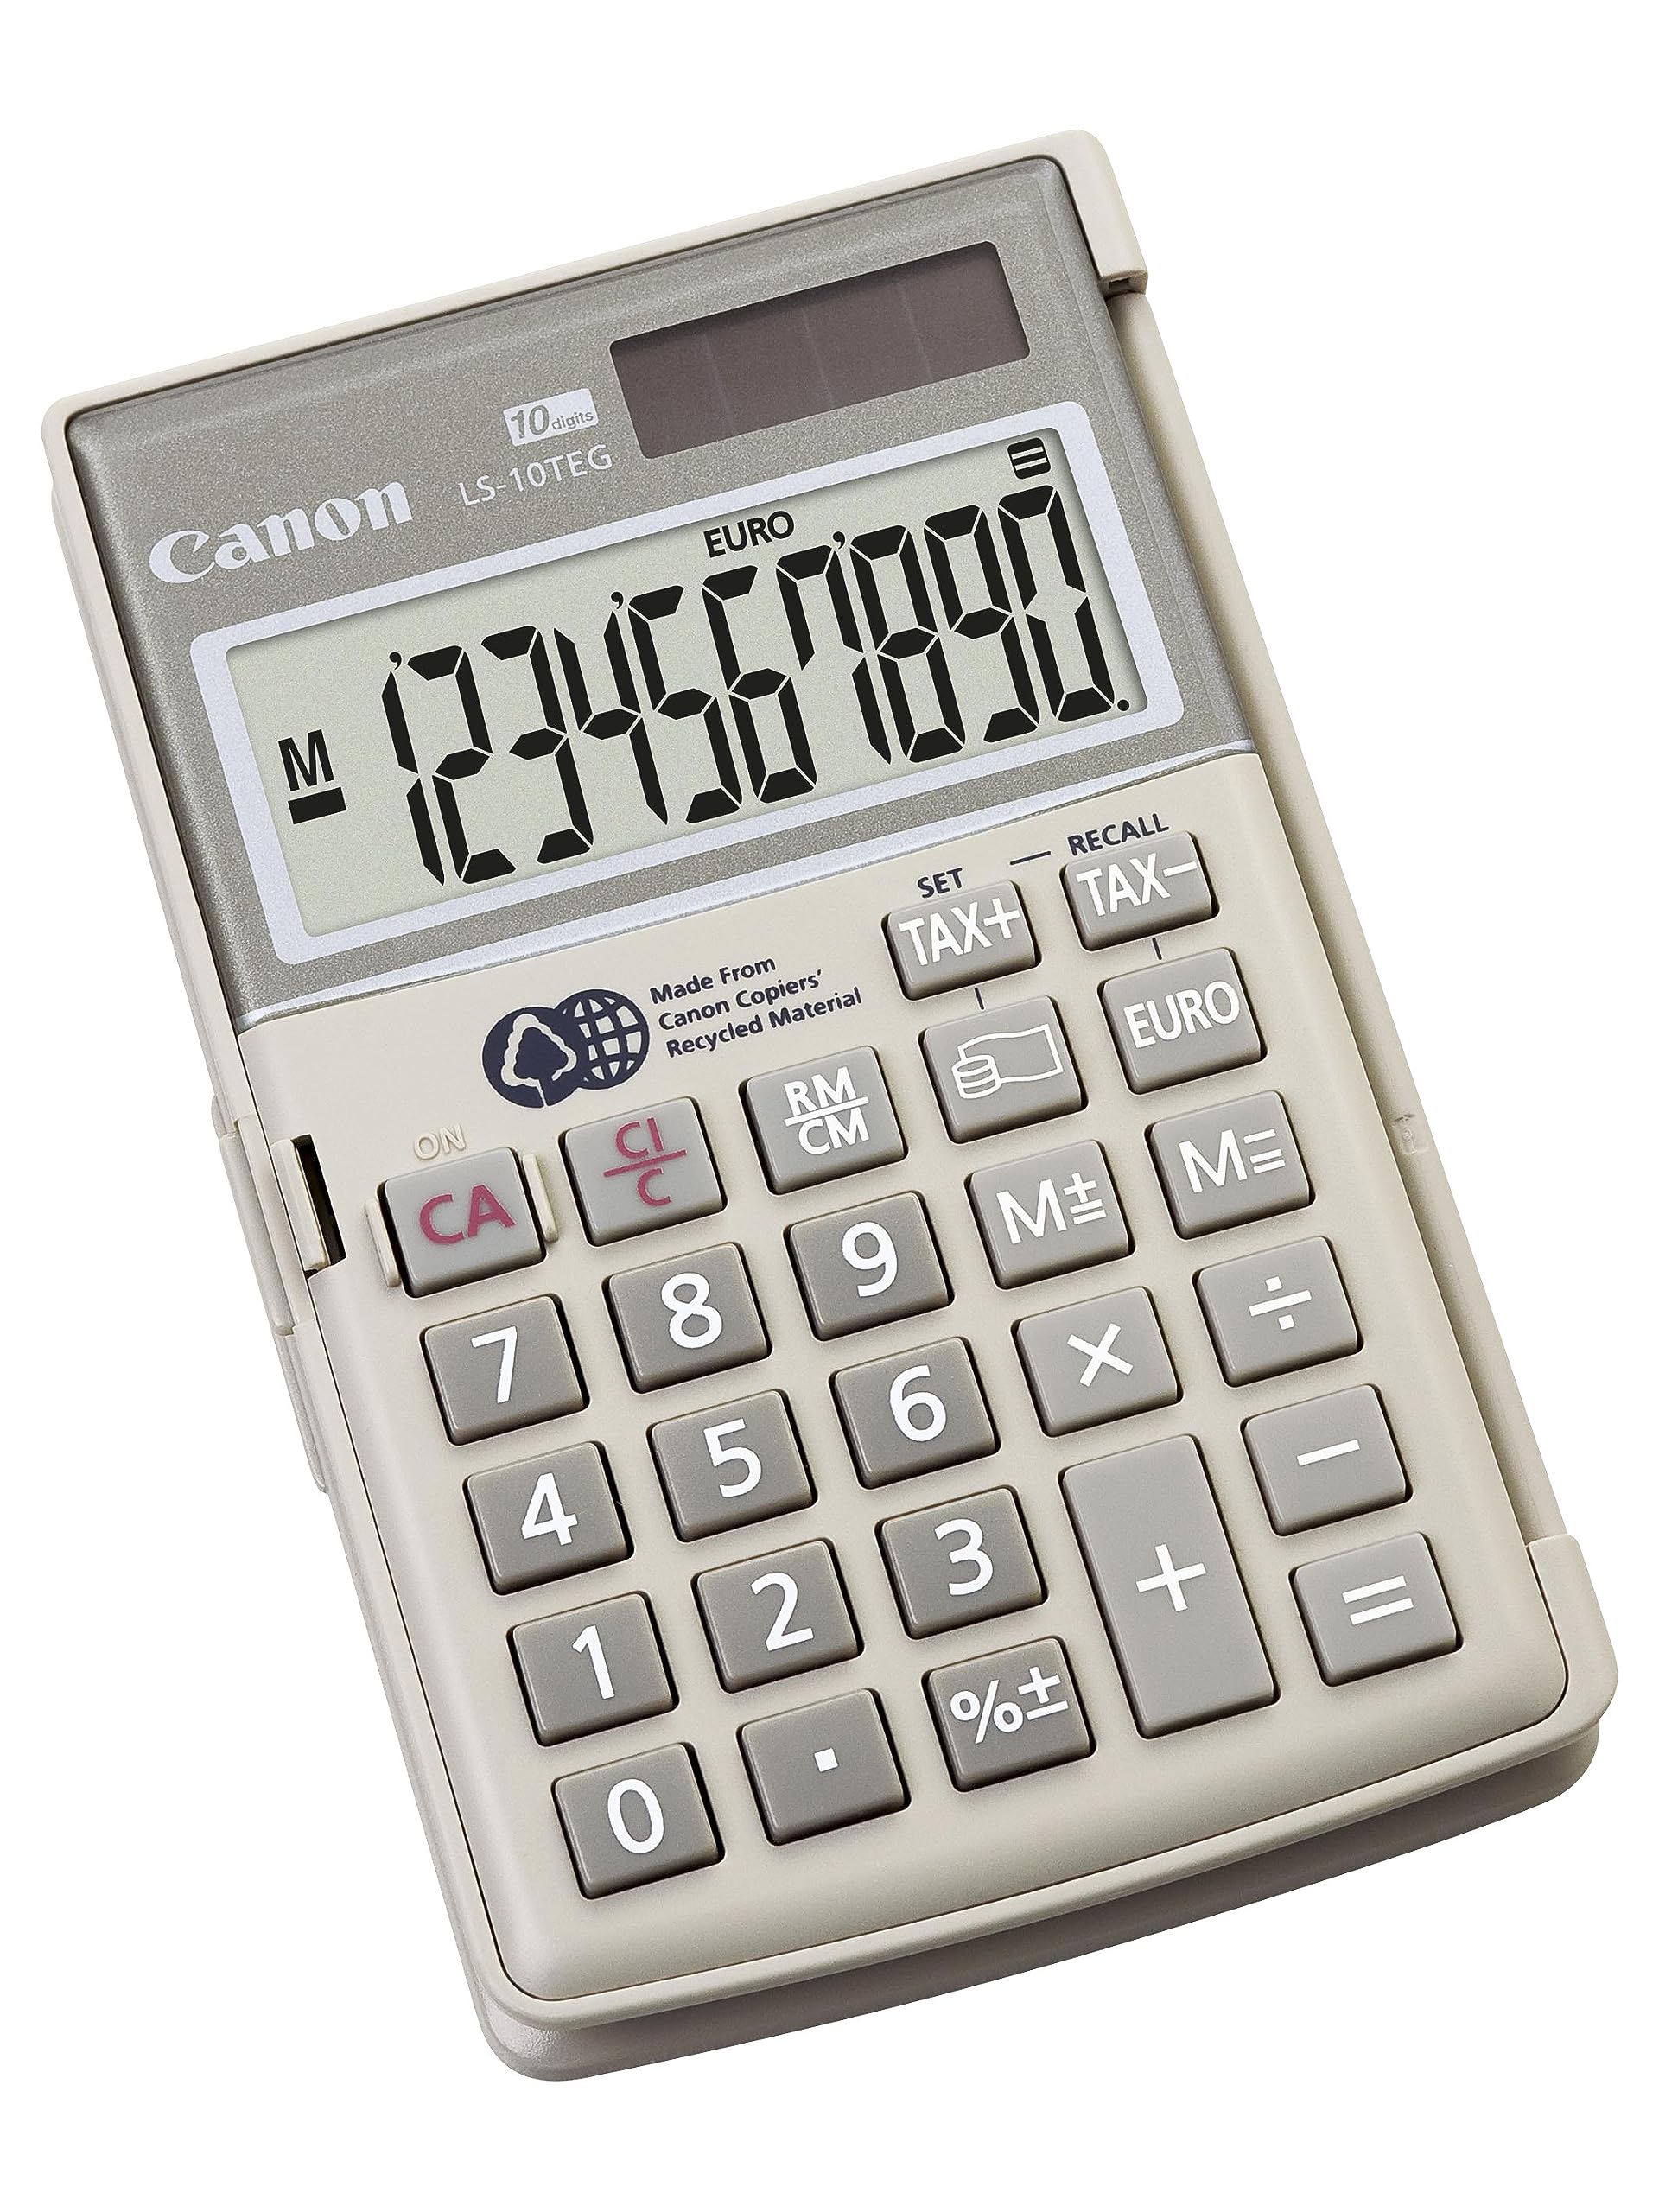 Canon LS-10TEG 10 Digit Handheld Calculator with Tax and Euro Currency Functions - White